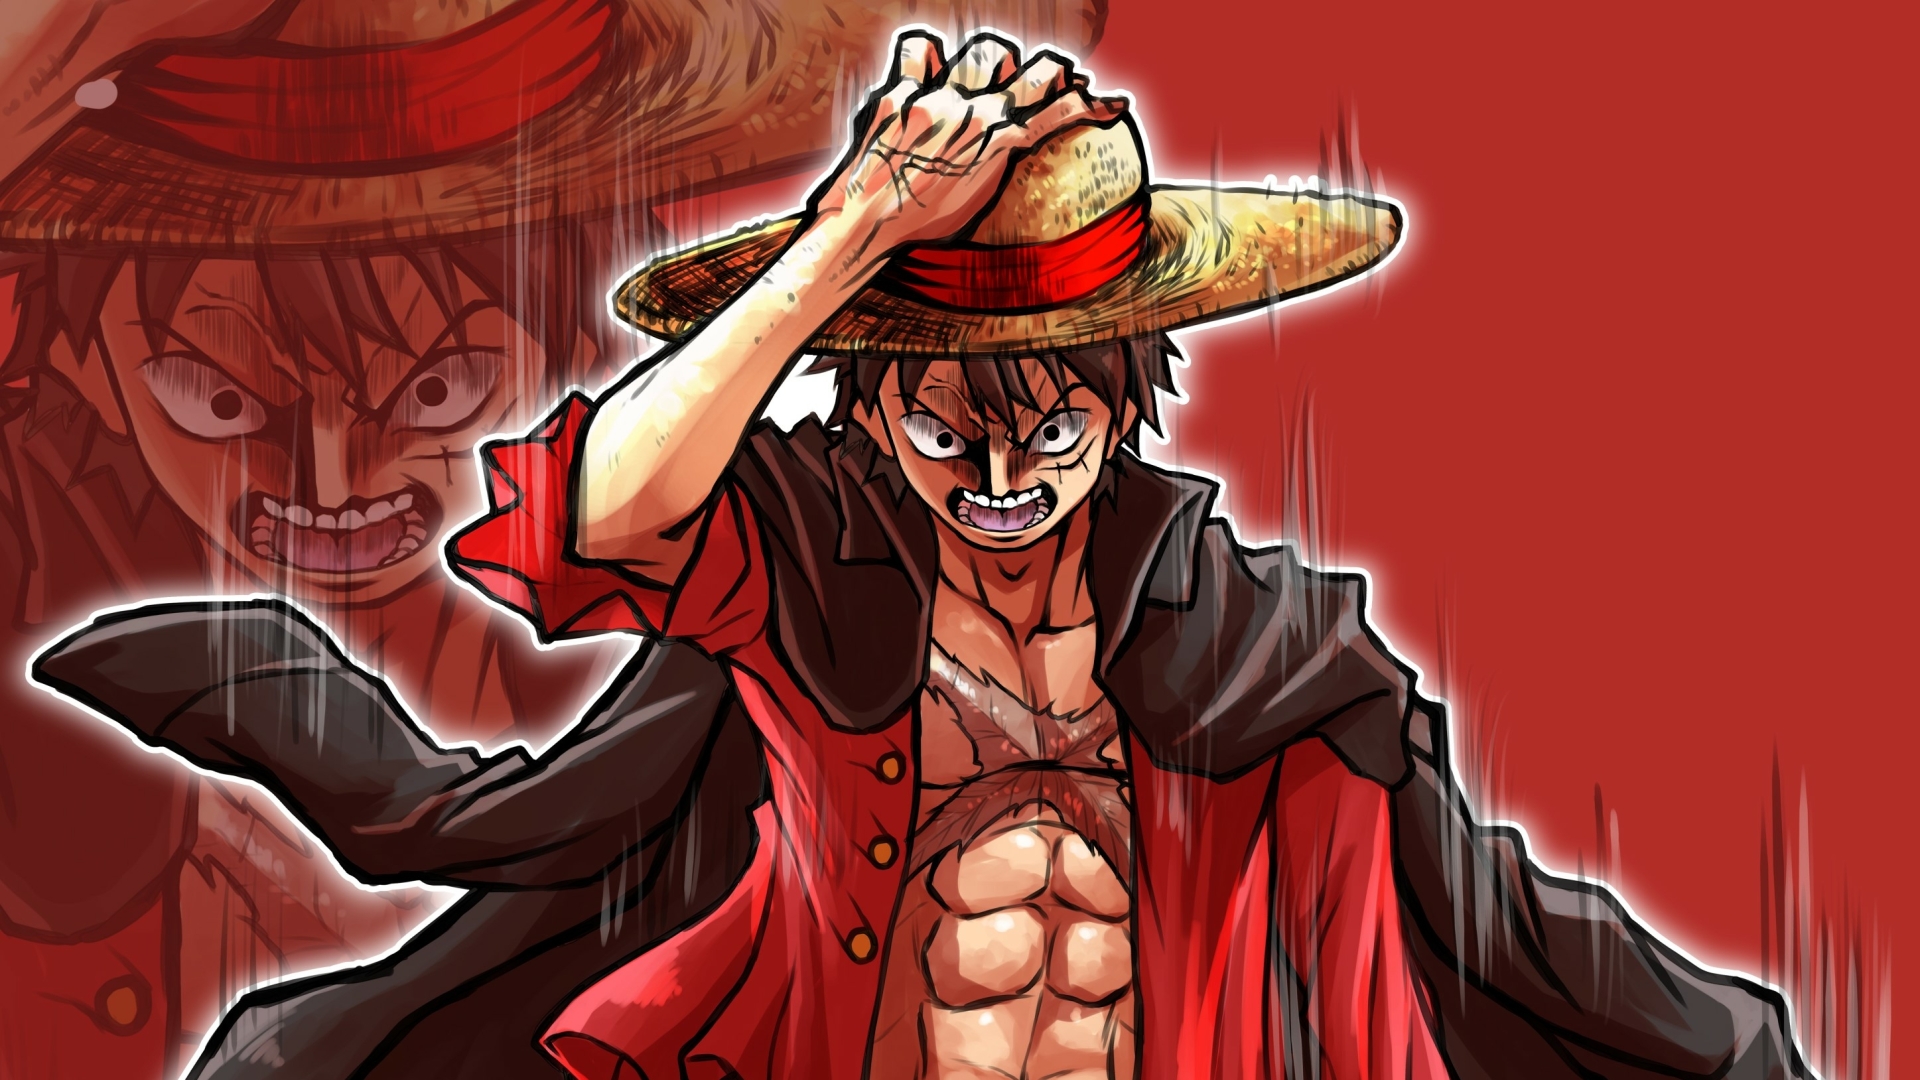 Wallpaper One Piece Luffy (70+ pictures)